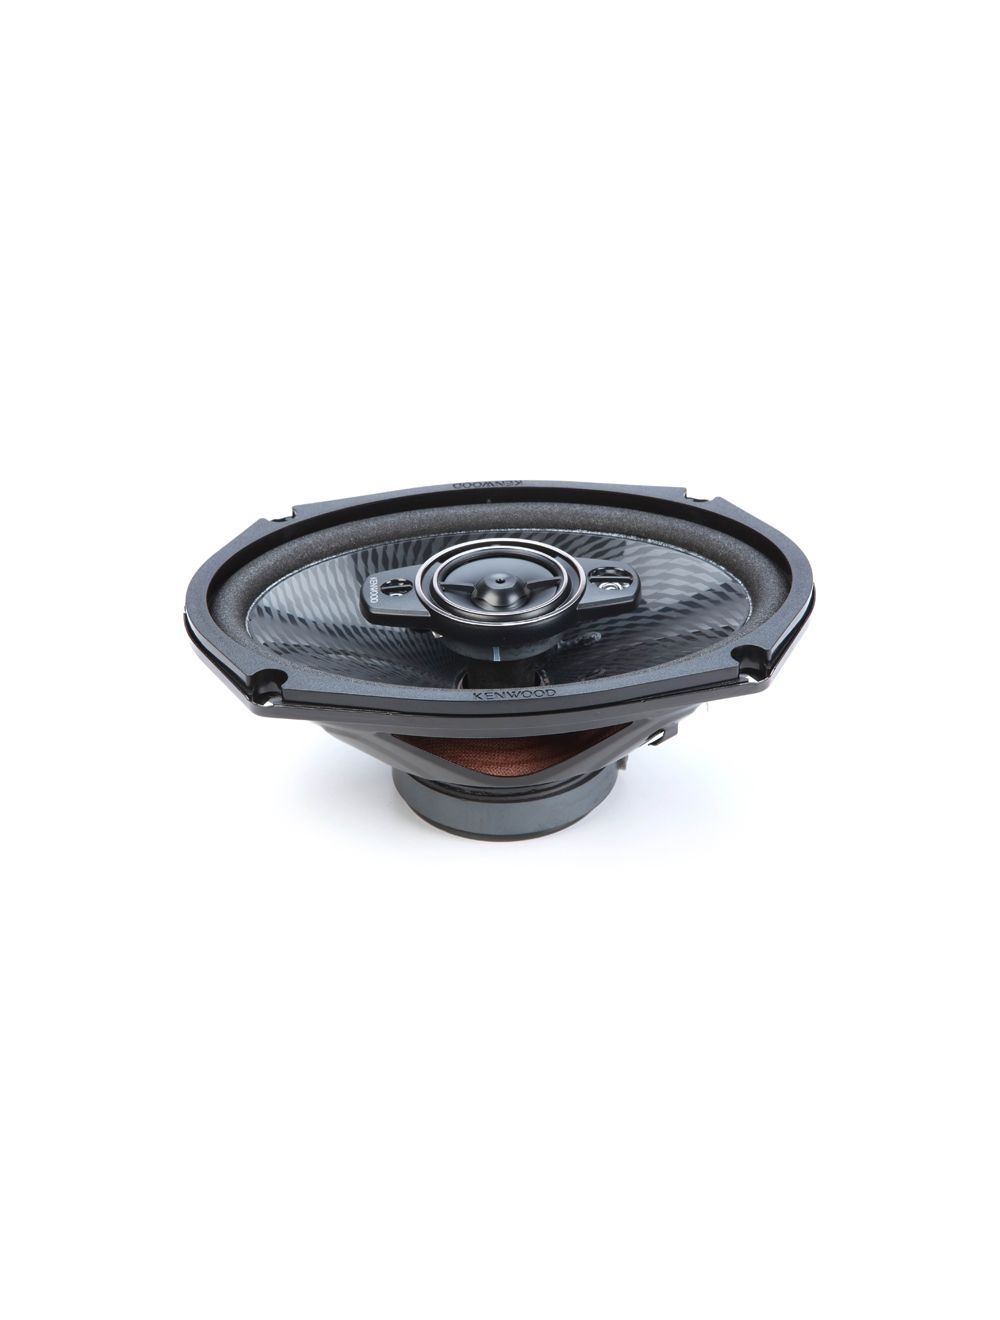 Car Speaker Size Replacement fits 2003-2006 for Mazda MPV Van (not amplified)